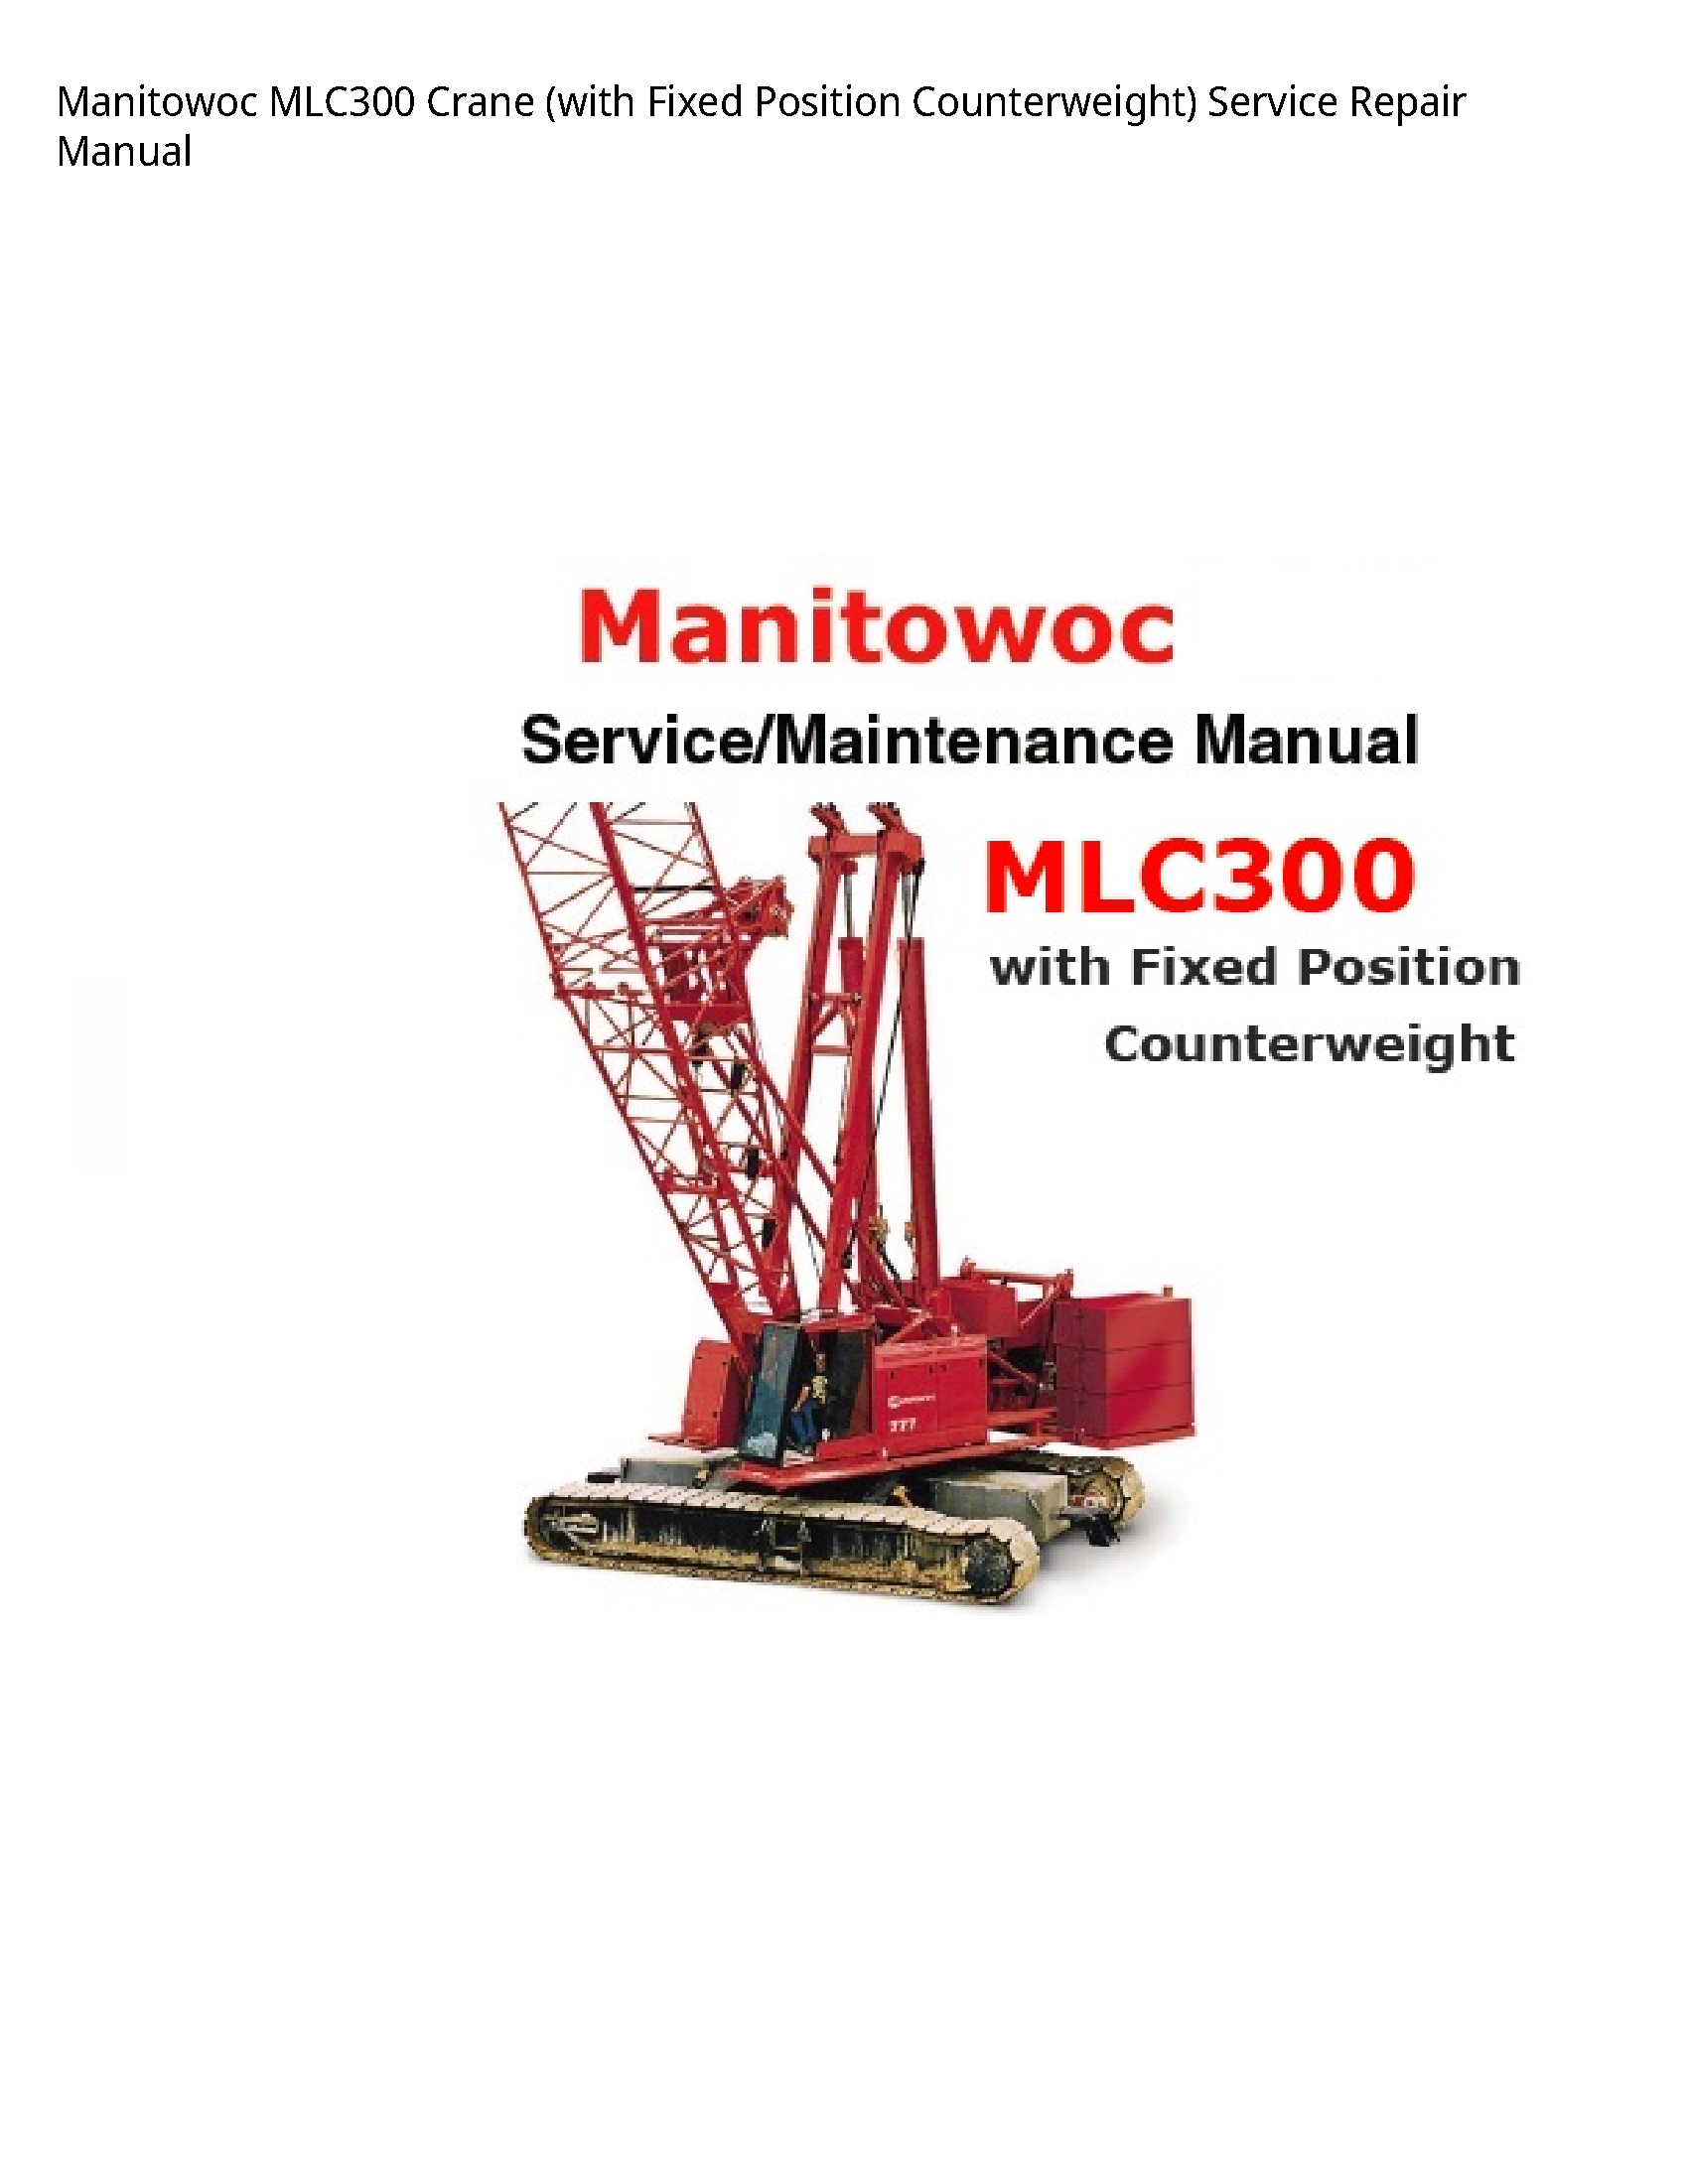 Manitowoc MLC300 Crane (with Fixed Position Counterweight) manual